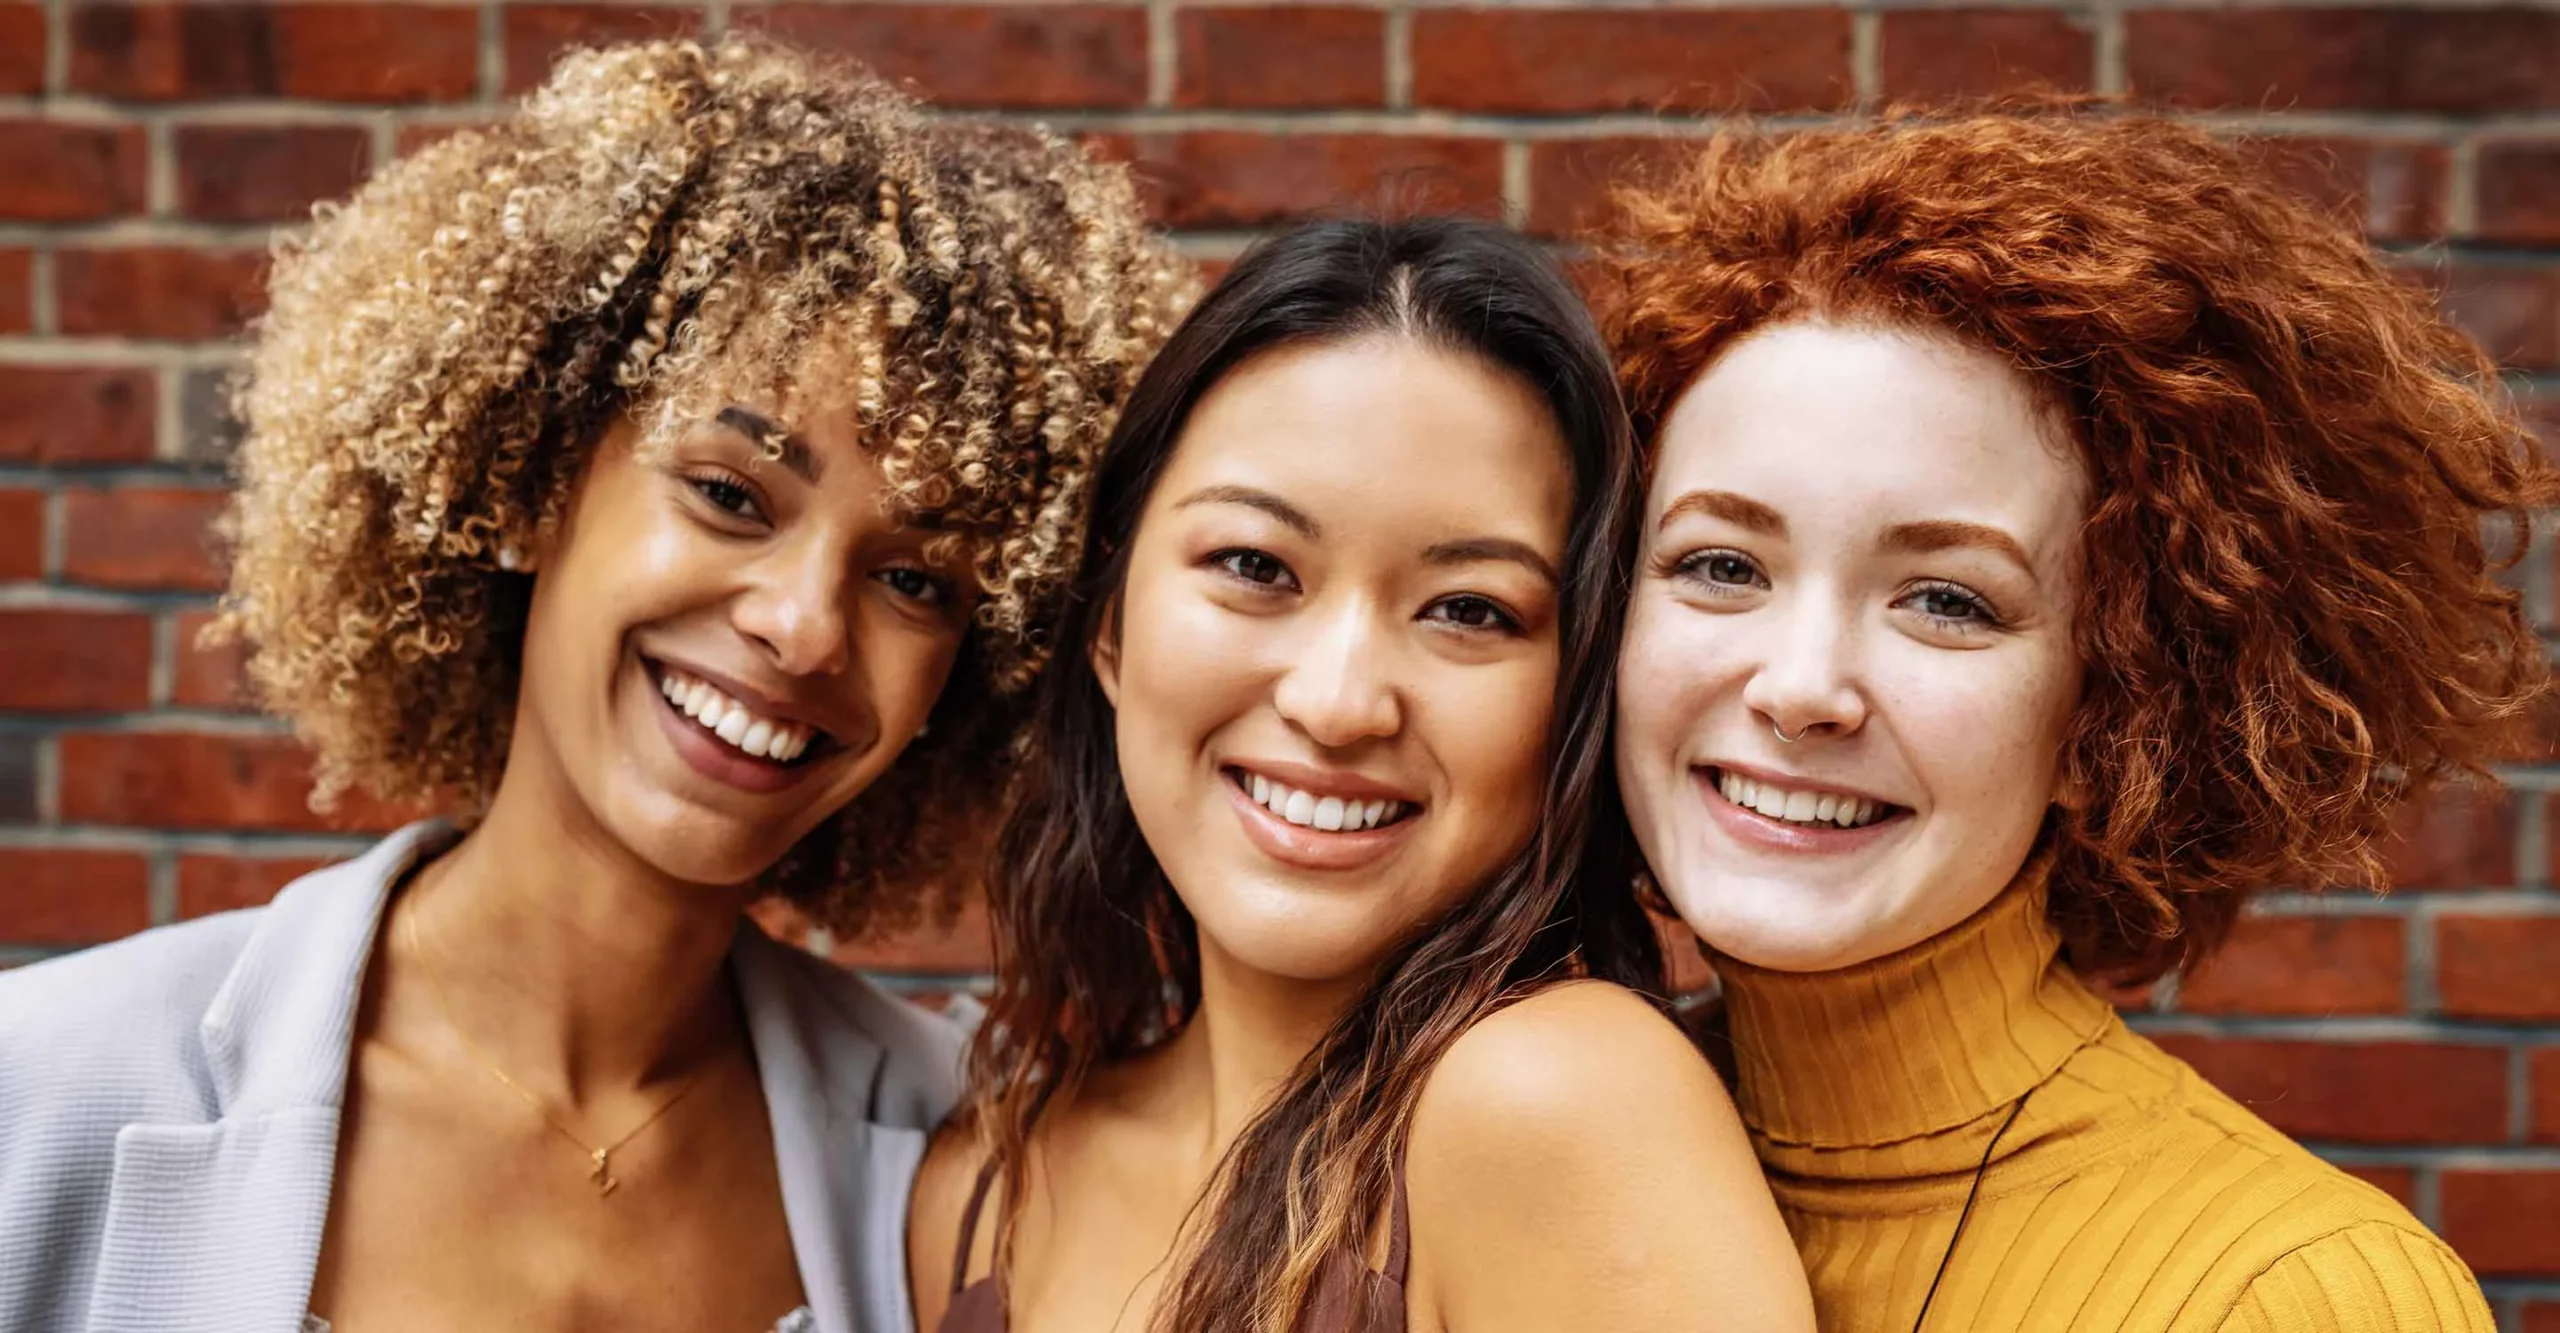 Three women with different types of curly and wavy hair smile together.